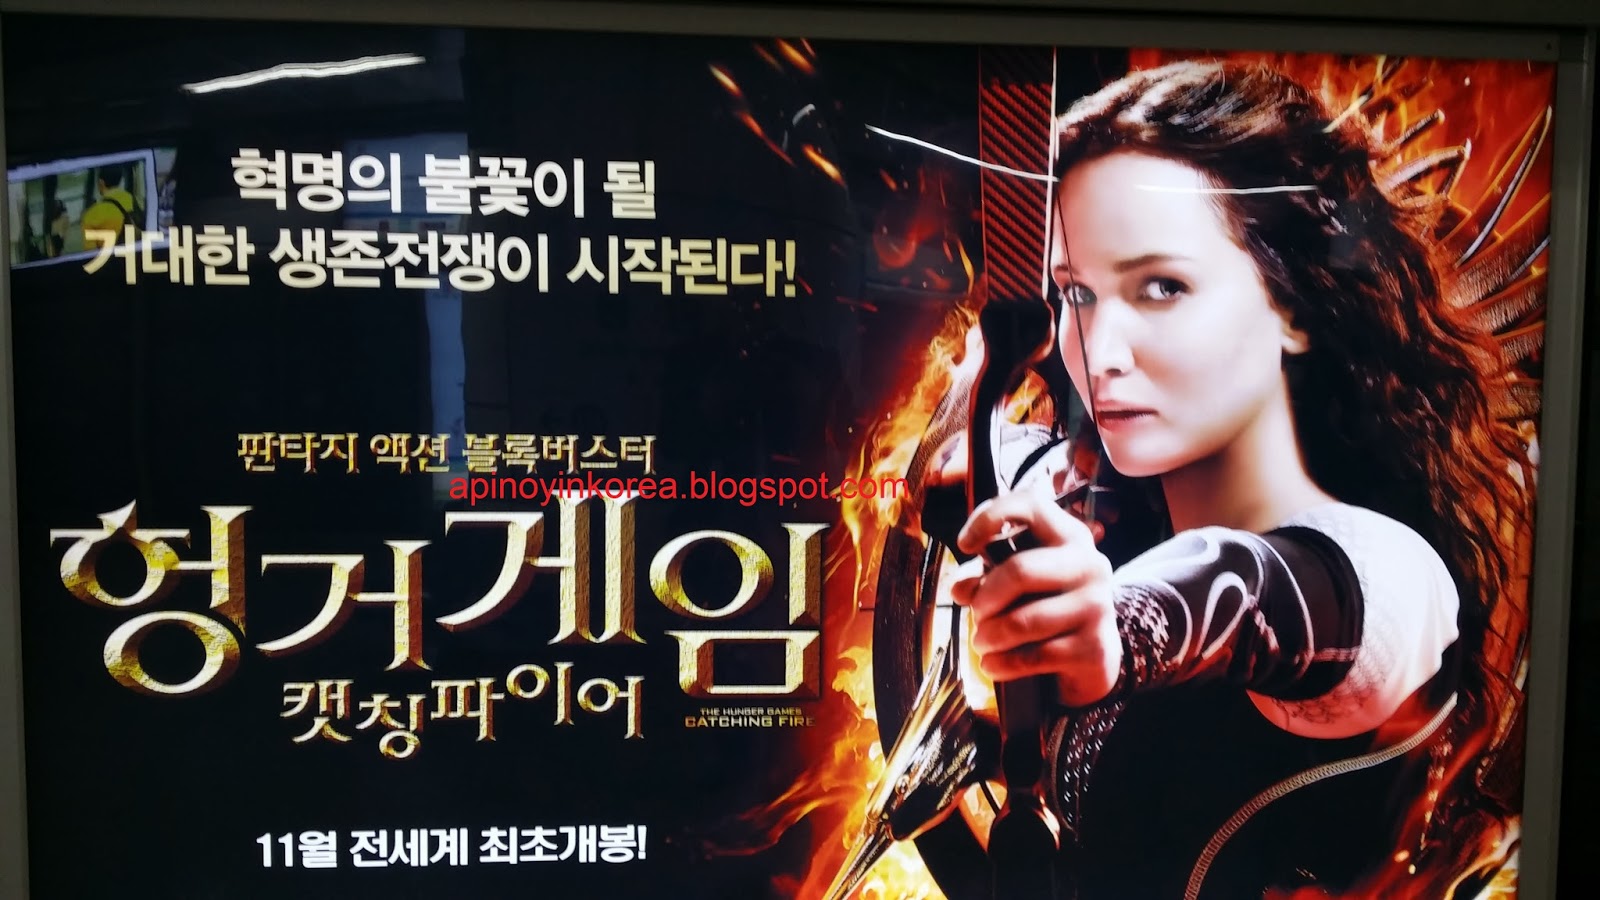 A Pinoy in Korea: A PInoy At The Movies: Hunger Games, Catching Fire